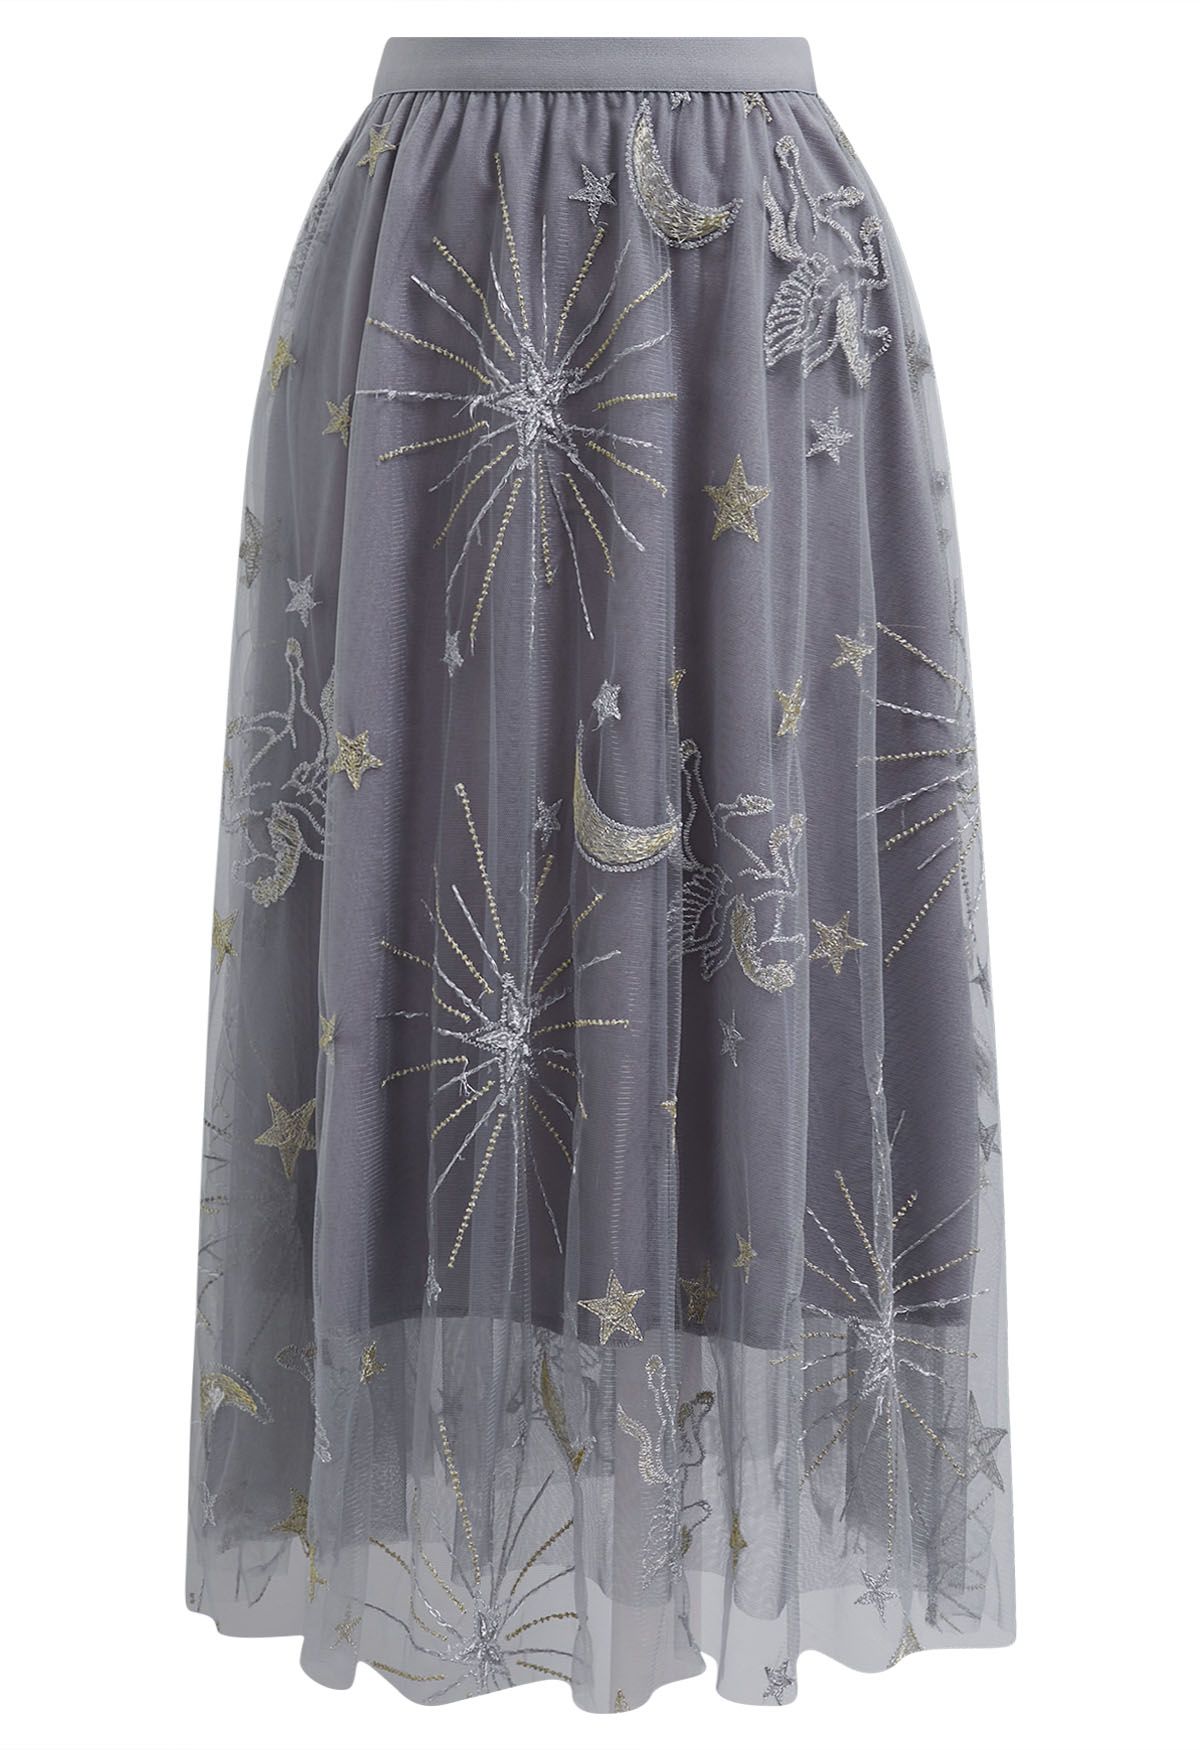 Mysterious Night Moon and Star Embroidered Mesh Tulle Skirt in Grey